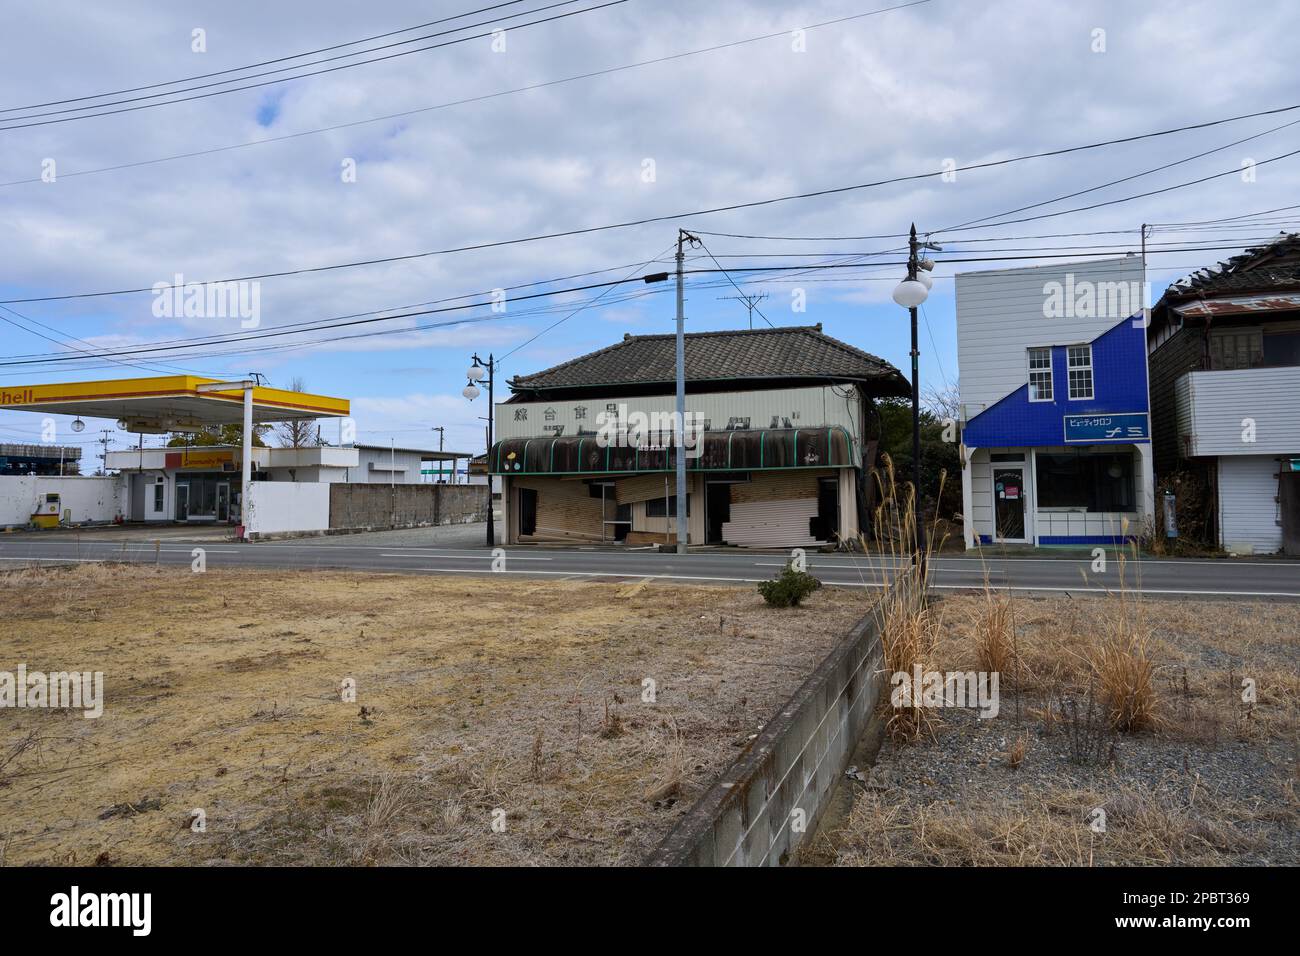 (230313) -- FUKUSHIMA, March 13, 2023 (Xinhua) -- This photo taken on March 6, 2023 shows abandoned houses in Futabacho, Futabagun of Fukushima Prefecture in Japan. Struck by a magnitude-9.0 earthquake and ensuing tsunami that hit Japan's northeast on March 11, 2011, the power plant suffered core meltdowns, resulting in a level-7 nuclear accident, the highest on the International Nuclear and Radiological Event Scale. Twelve years after the 2011 accident traumatized Fukushima's fishing industry, local fishermen are still struggling for recovery. As Japan pushes ahead with dumping tons of con Stock Photo